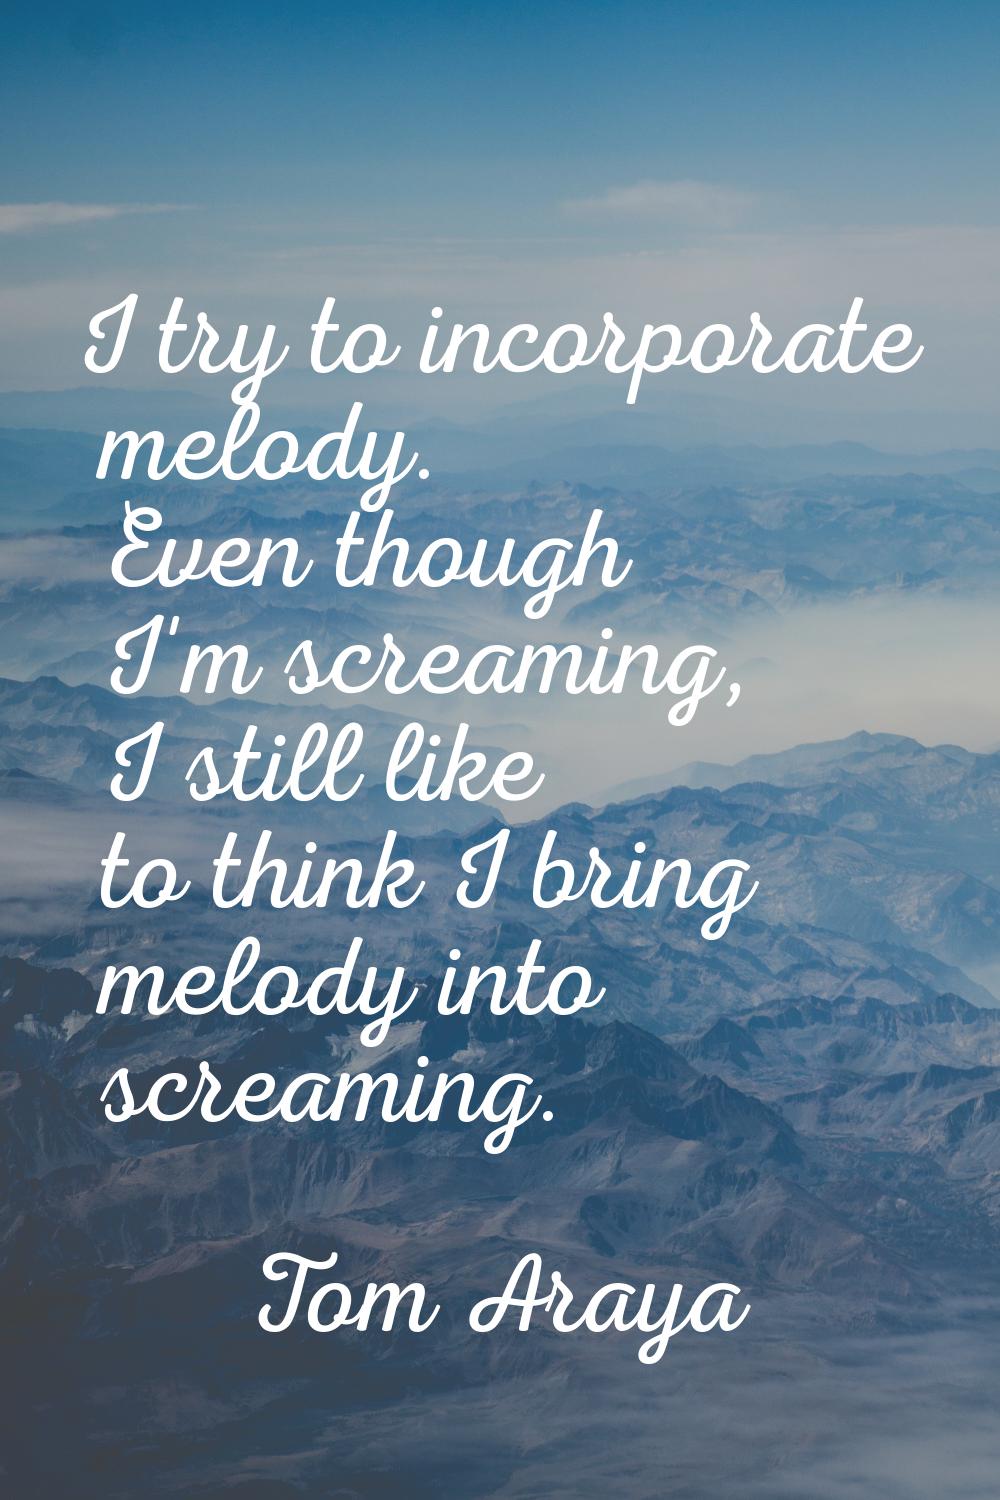 I try to incorporate melody. Even though I'm screaming, I still like to think I bring melody into s